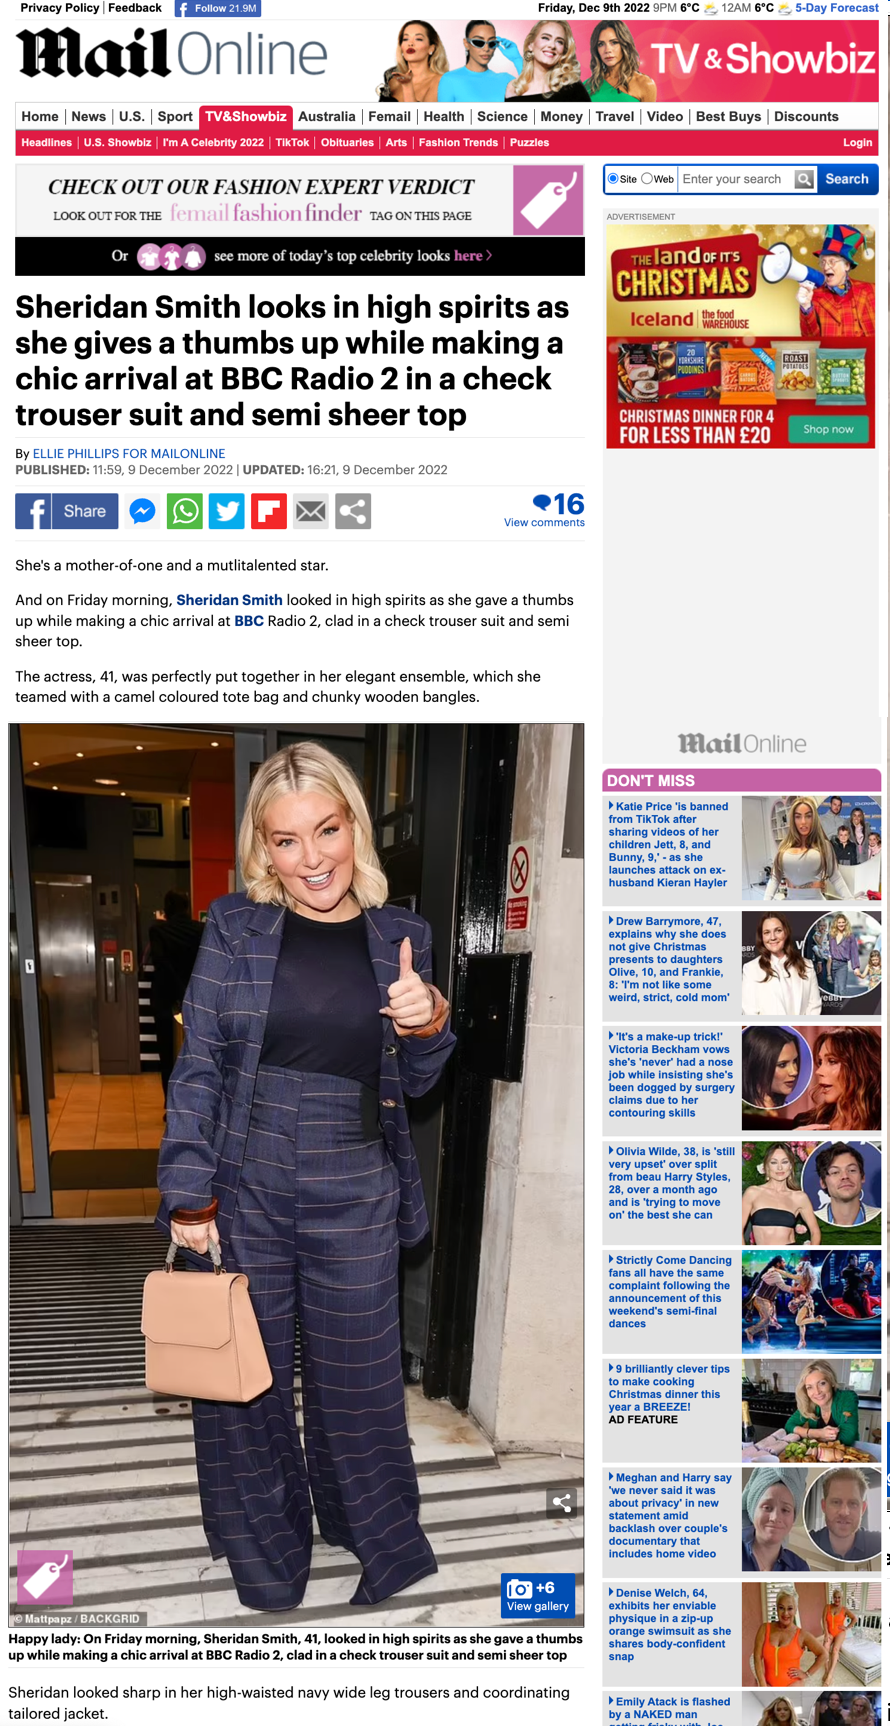 LAILA in Tawny Brown featured in the DailyMail!